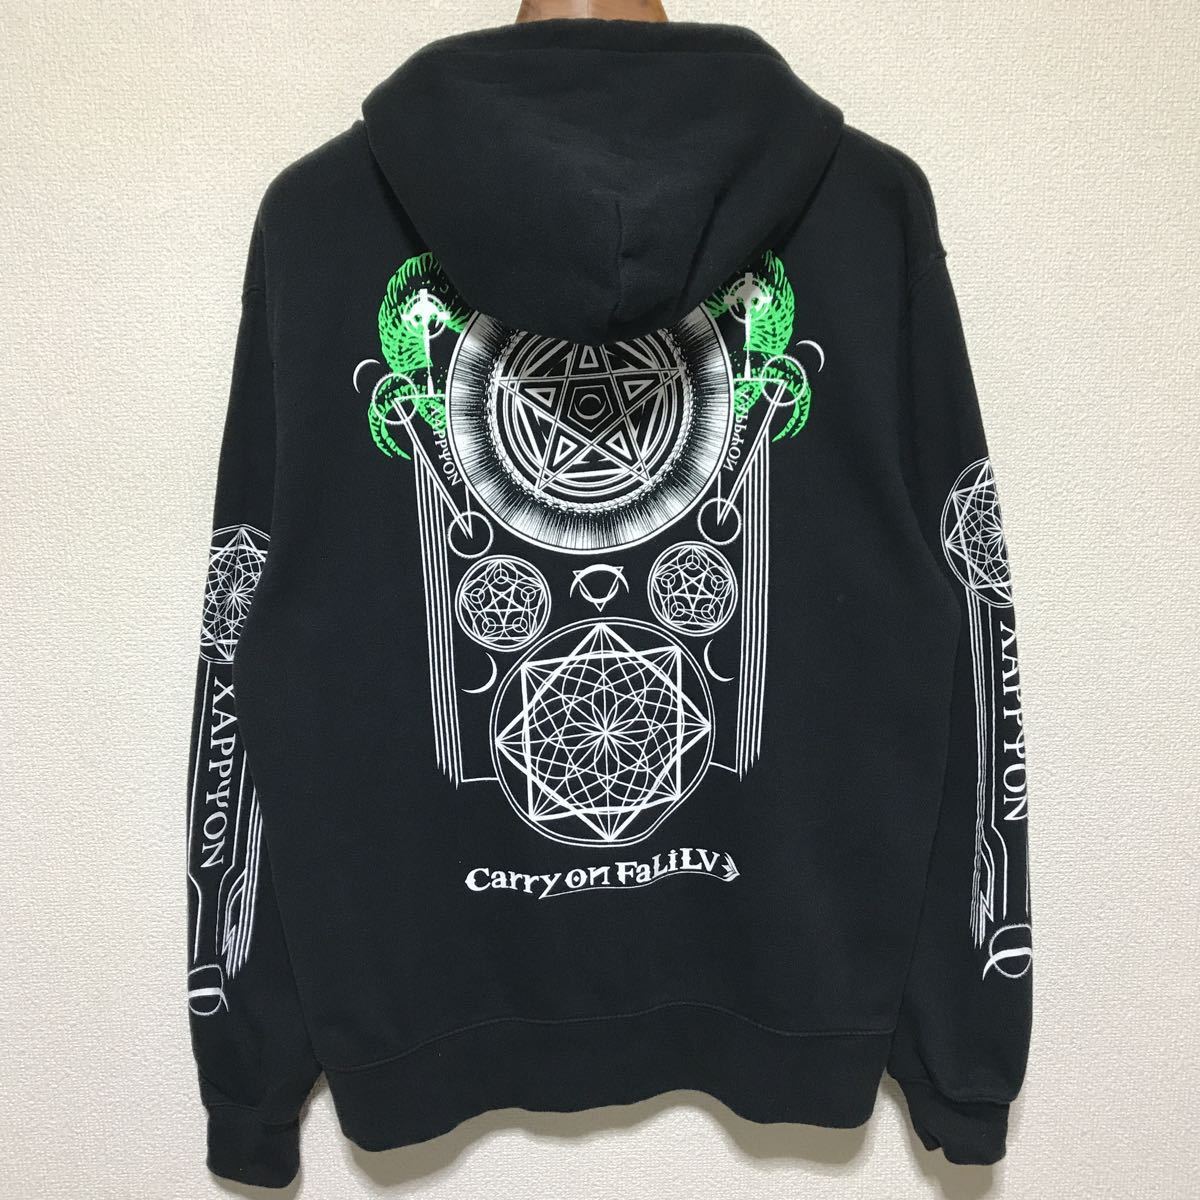 Fear and Loathing in Las Vegas/Carry on FaLiLV ZIP  HOODIE/ジップパーカー/フーディー/スウェット/ブラック/Lサイズ